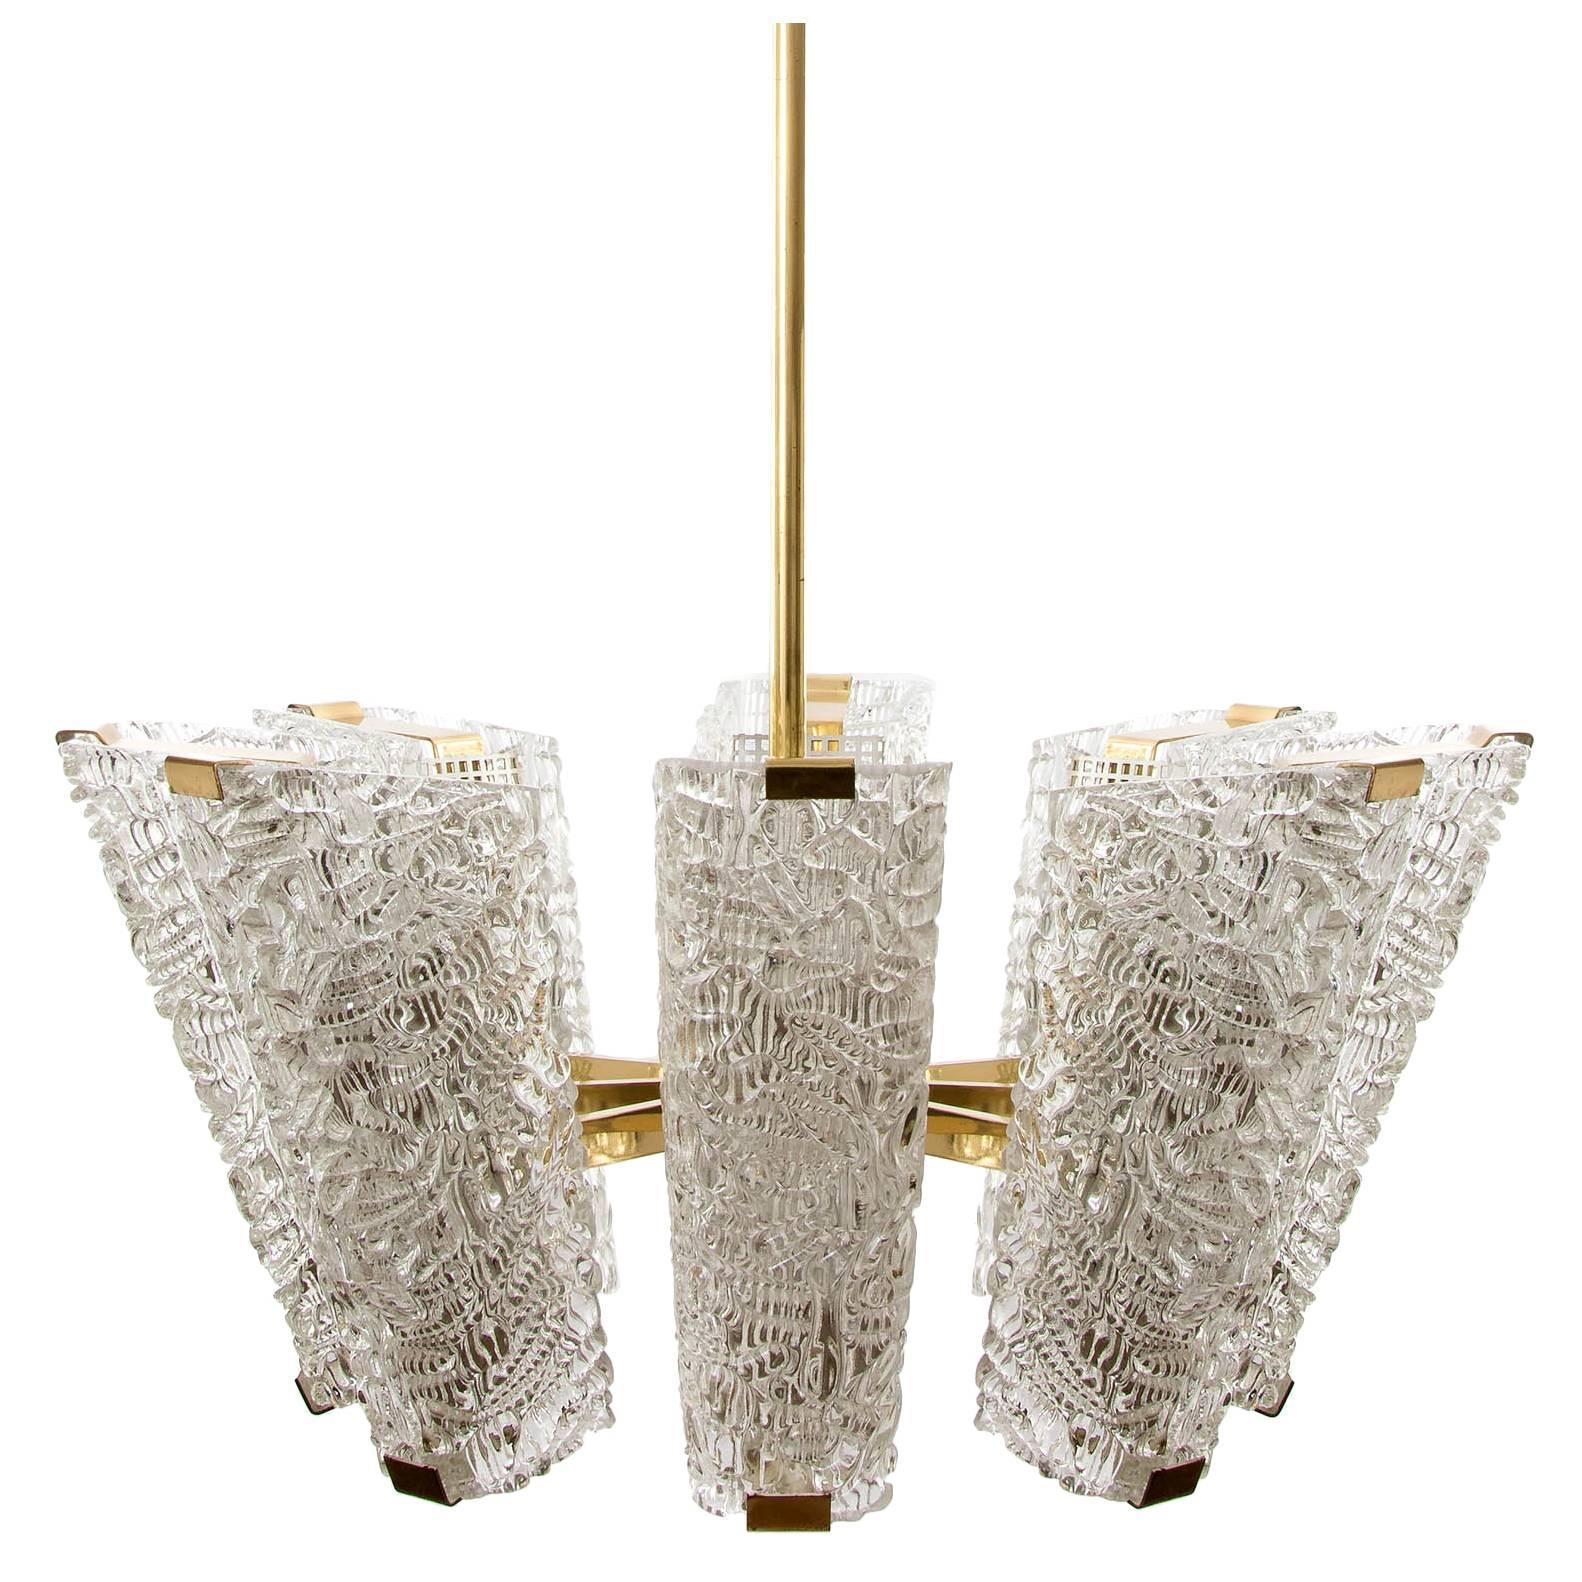 One of two impressive and large chandeliers by J.T. Kalmar, Austria, manufactured in midcentury, circa 1960 (late 1950s or early 1960s).
The fixture is made of polished brass in a warm tone, textured cast glass and perforated white paint metal.
It